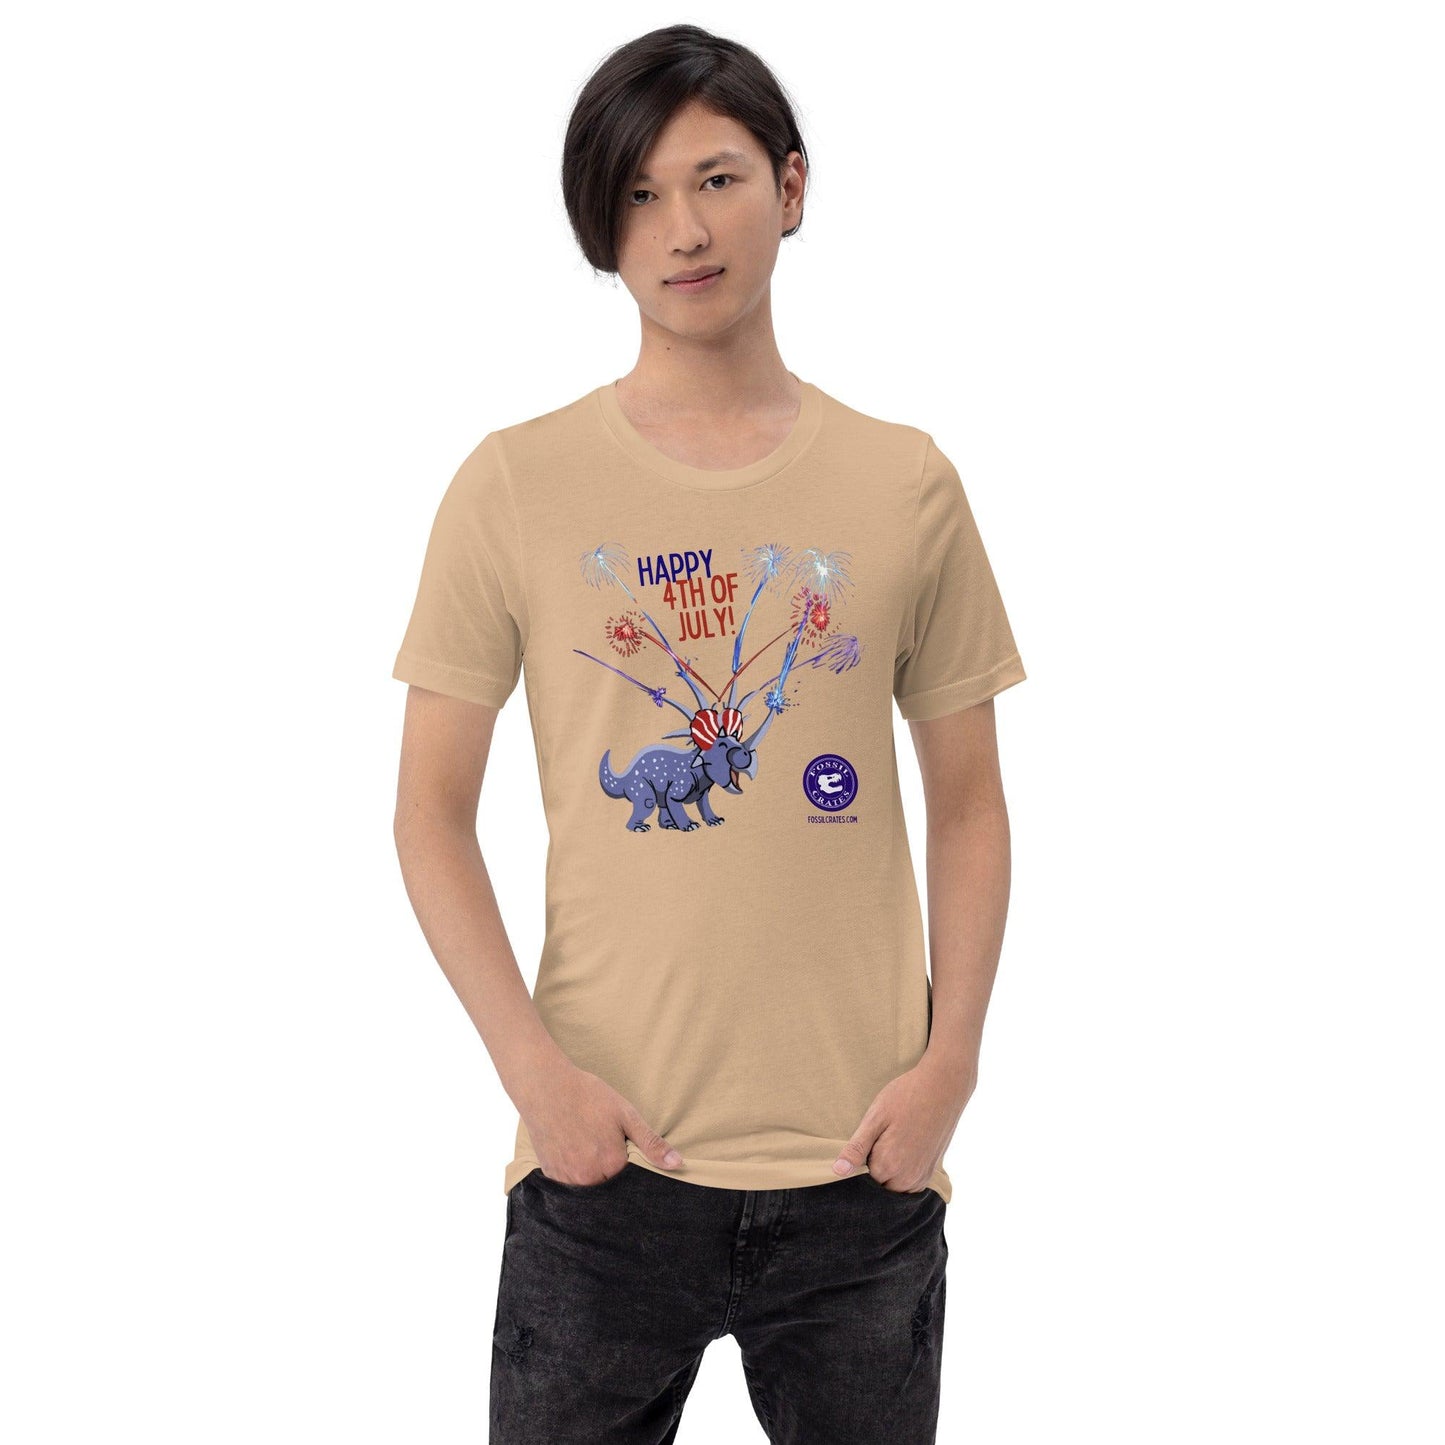 Happy 4th of July T-shirt - Fossil Crates Dinosaur T-Shirt